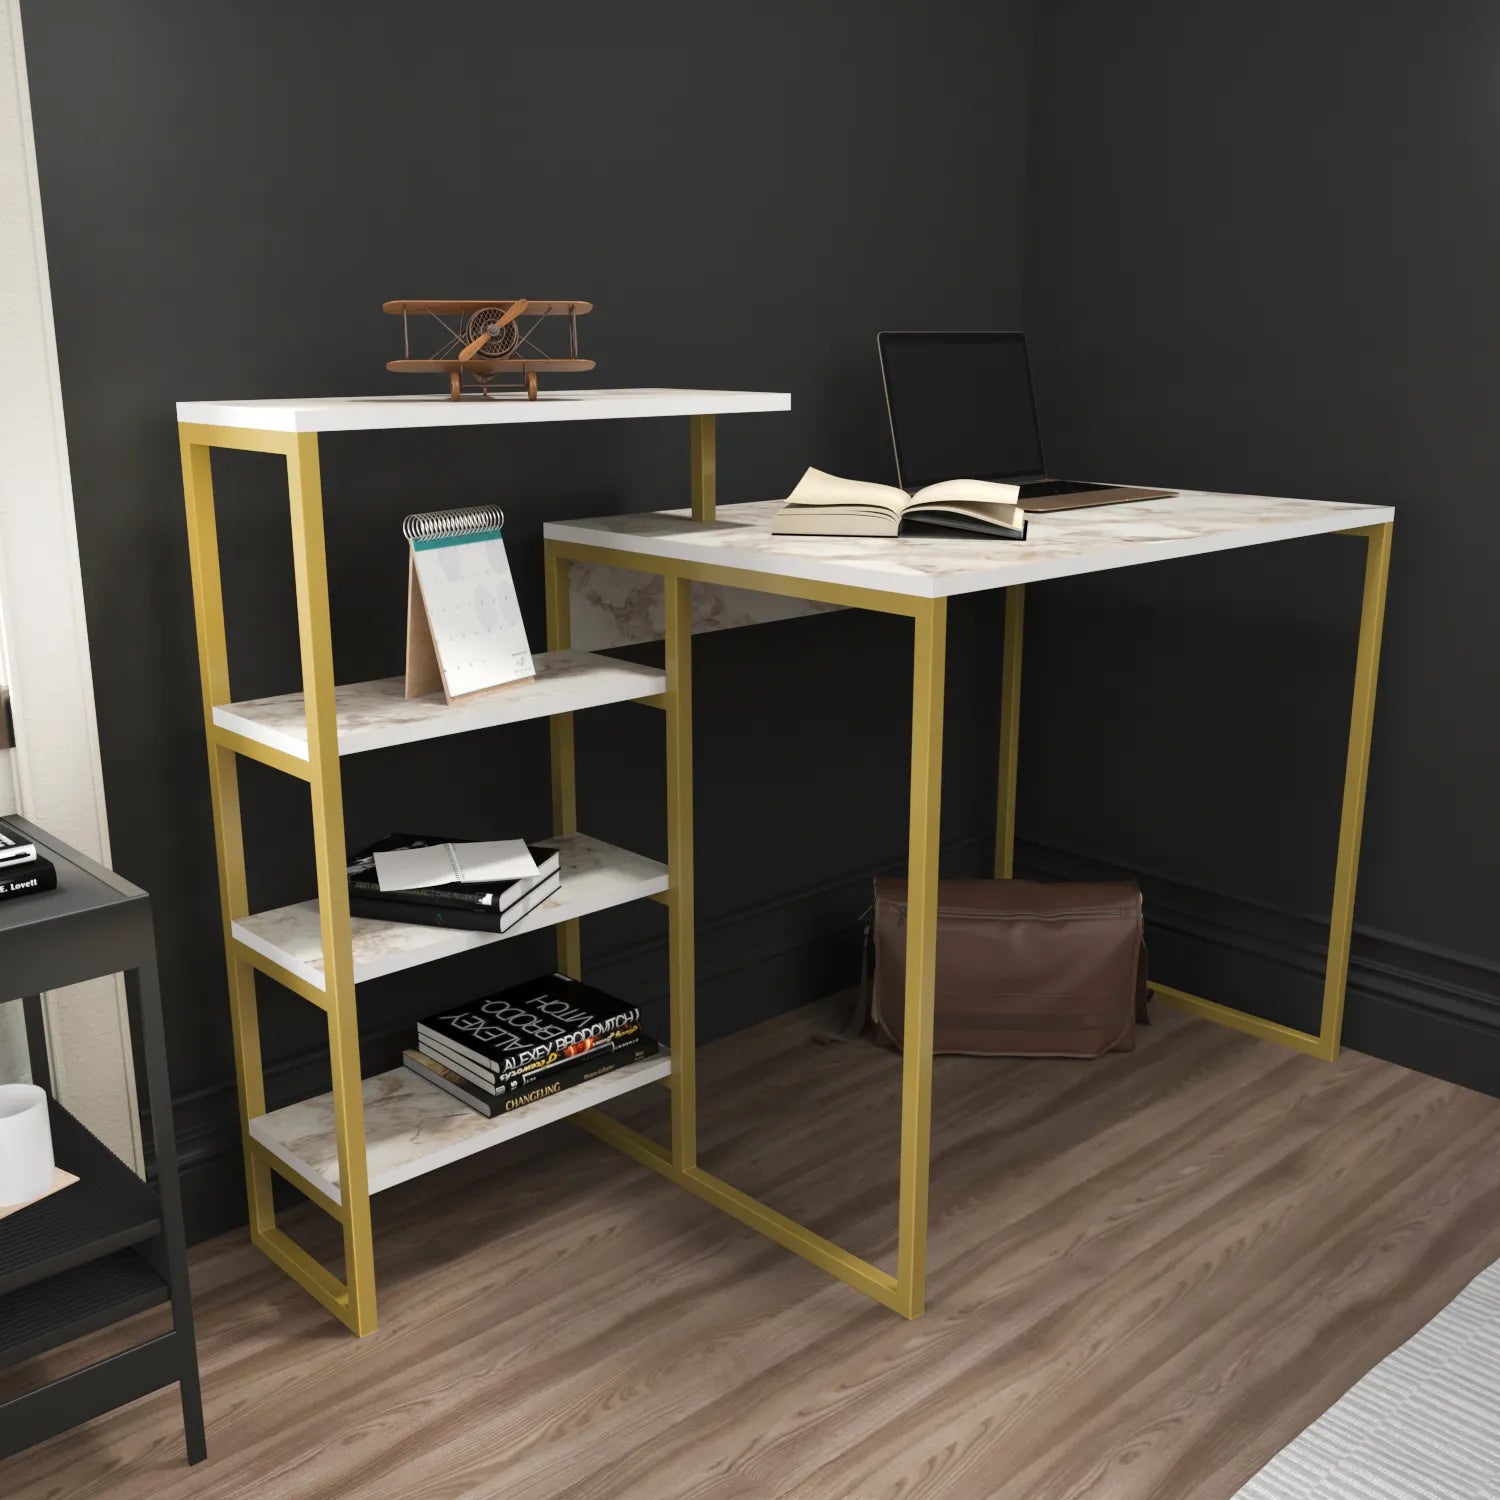 Rino 52 inch Wide Industrial Computer Writing Desk with Bookshelf